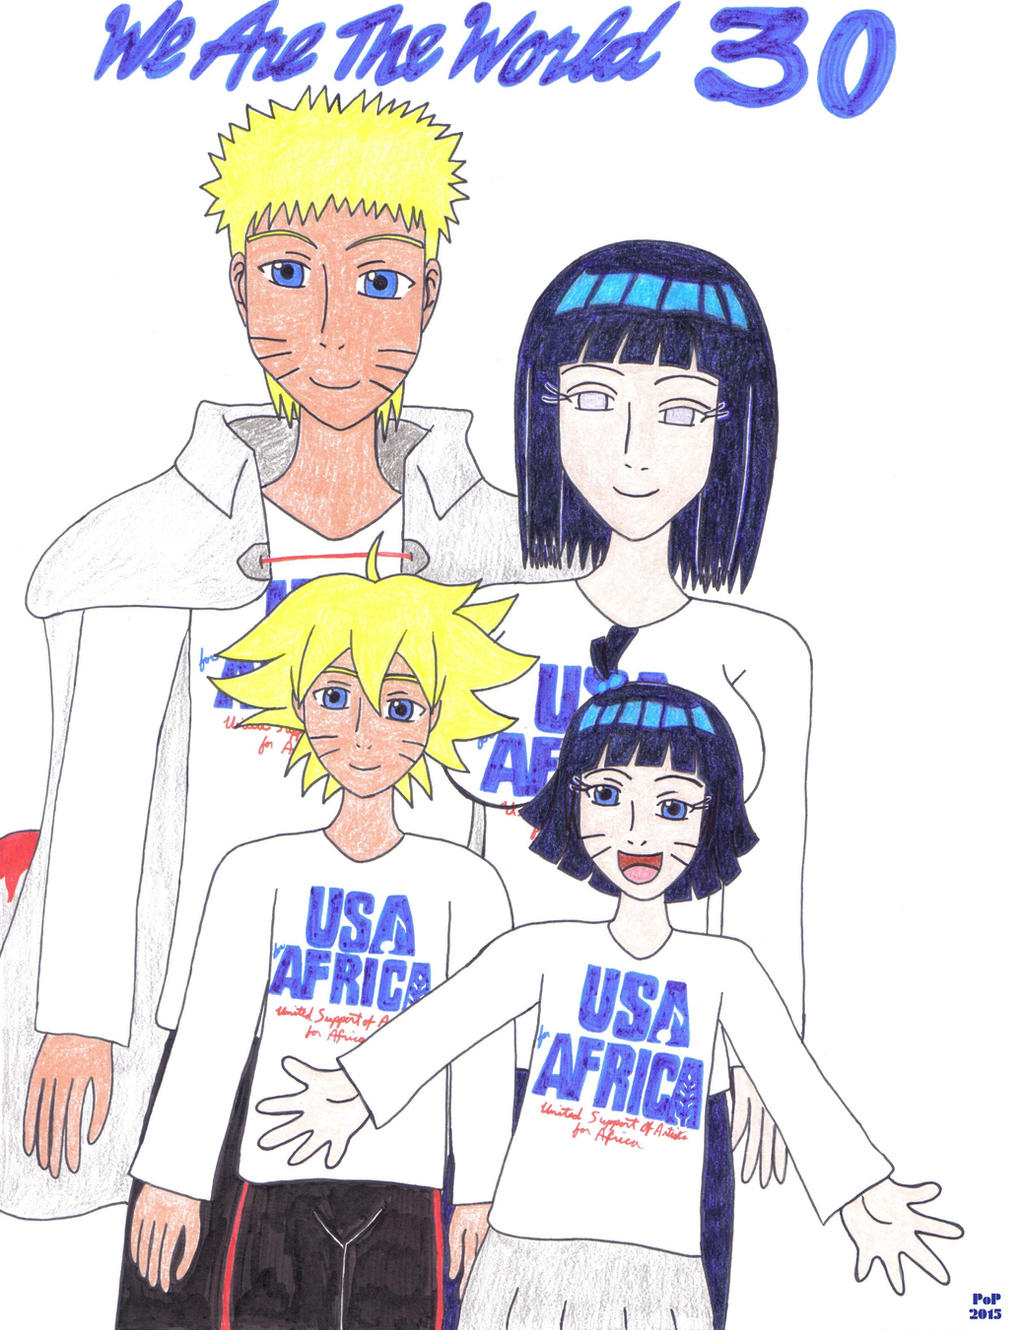 we_are_the_world_30_uzumaki_family_version_by_prince_of_pop-d8fqwub.jpg